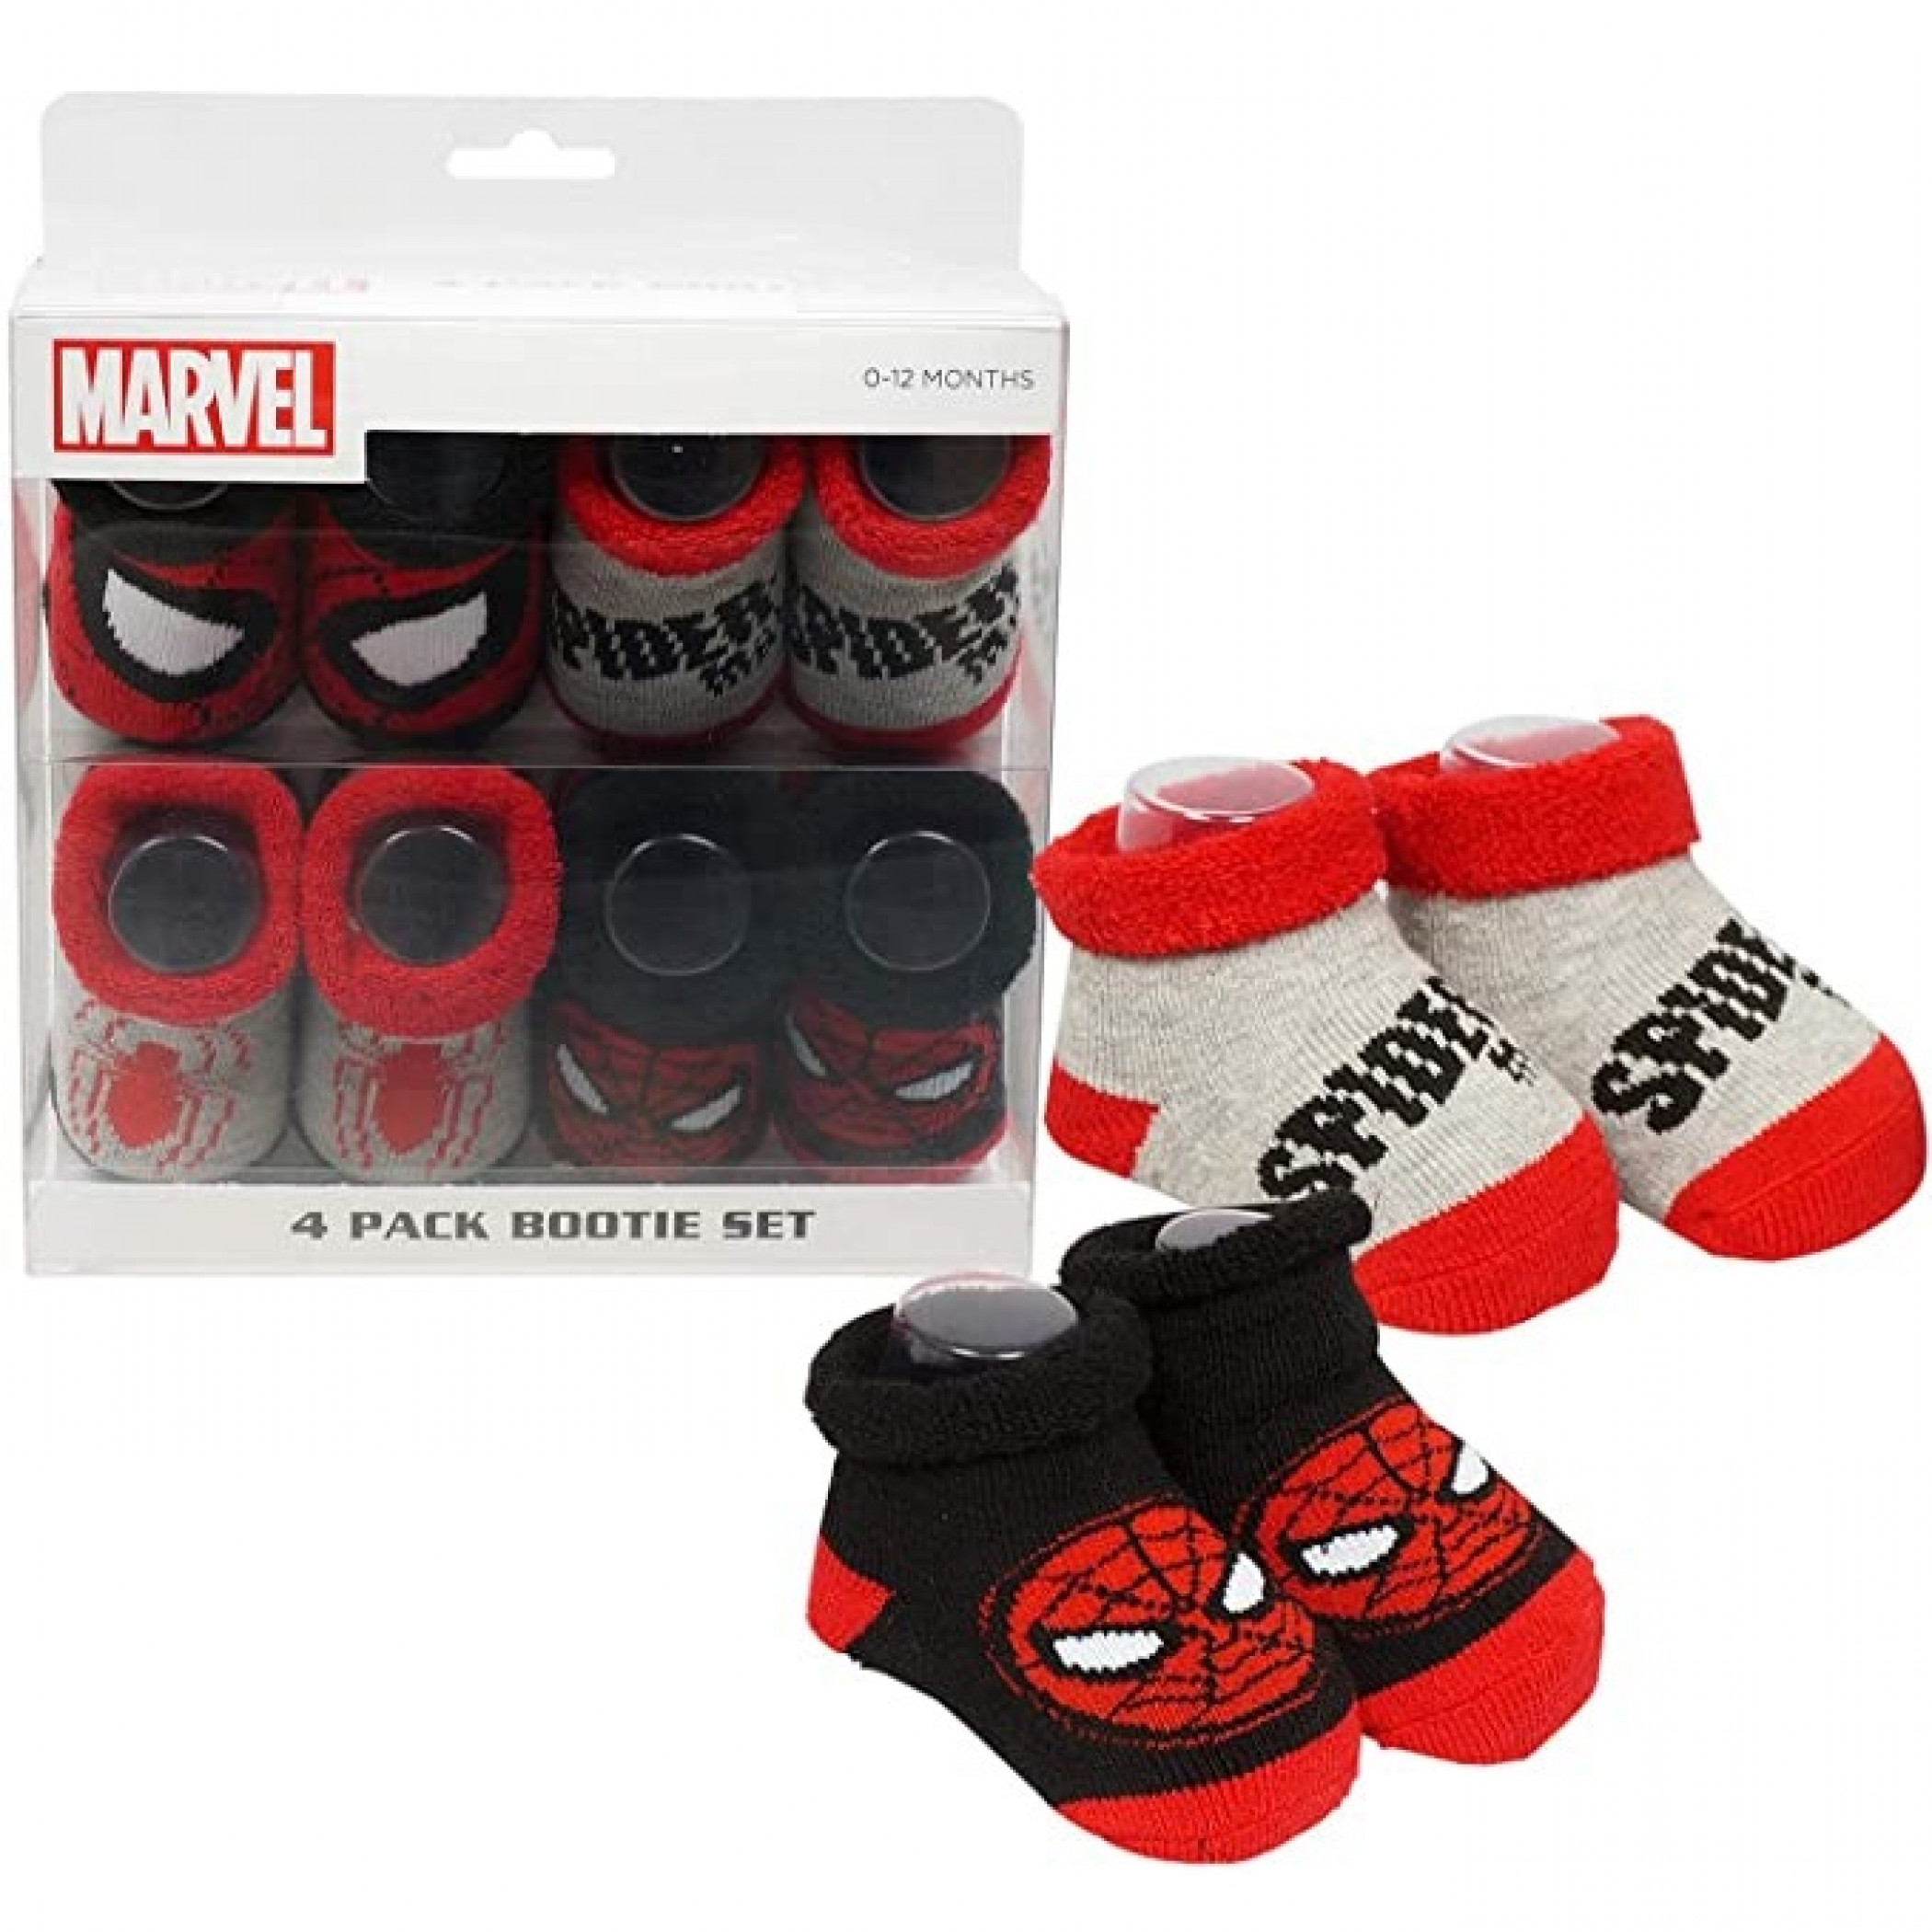 Spider-Man Patterned Baby Bootie 4-Pack Set